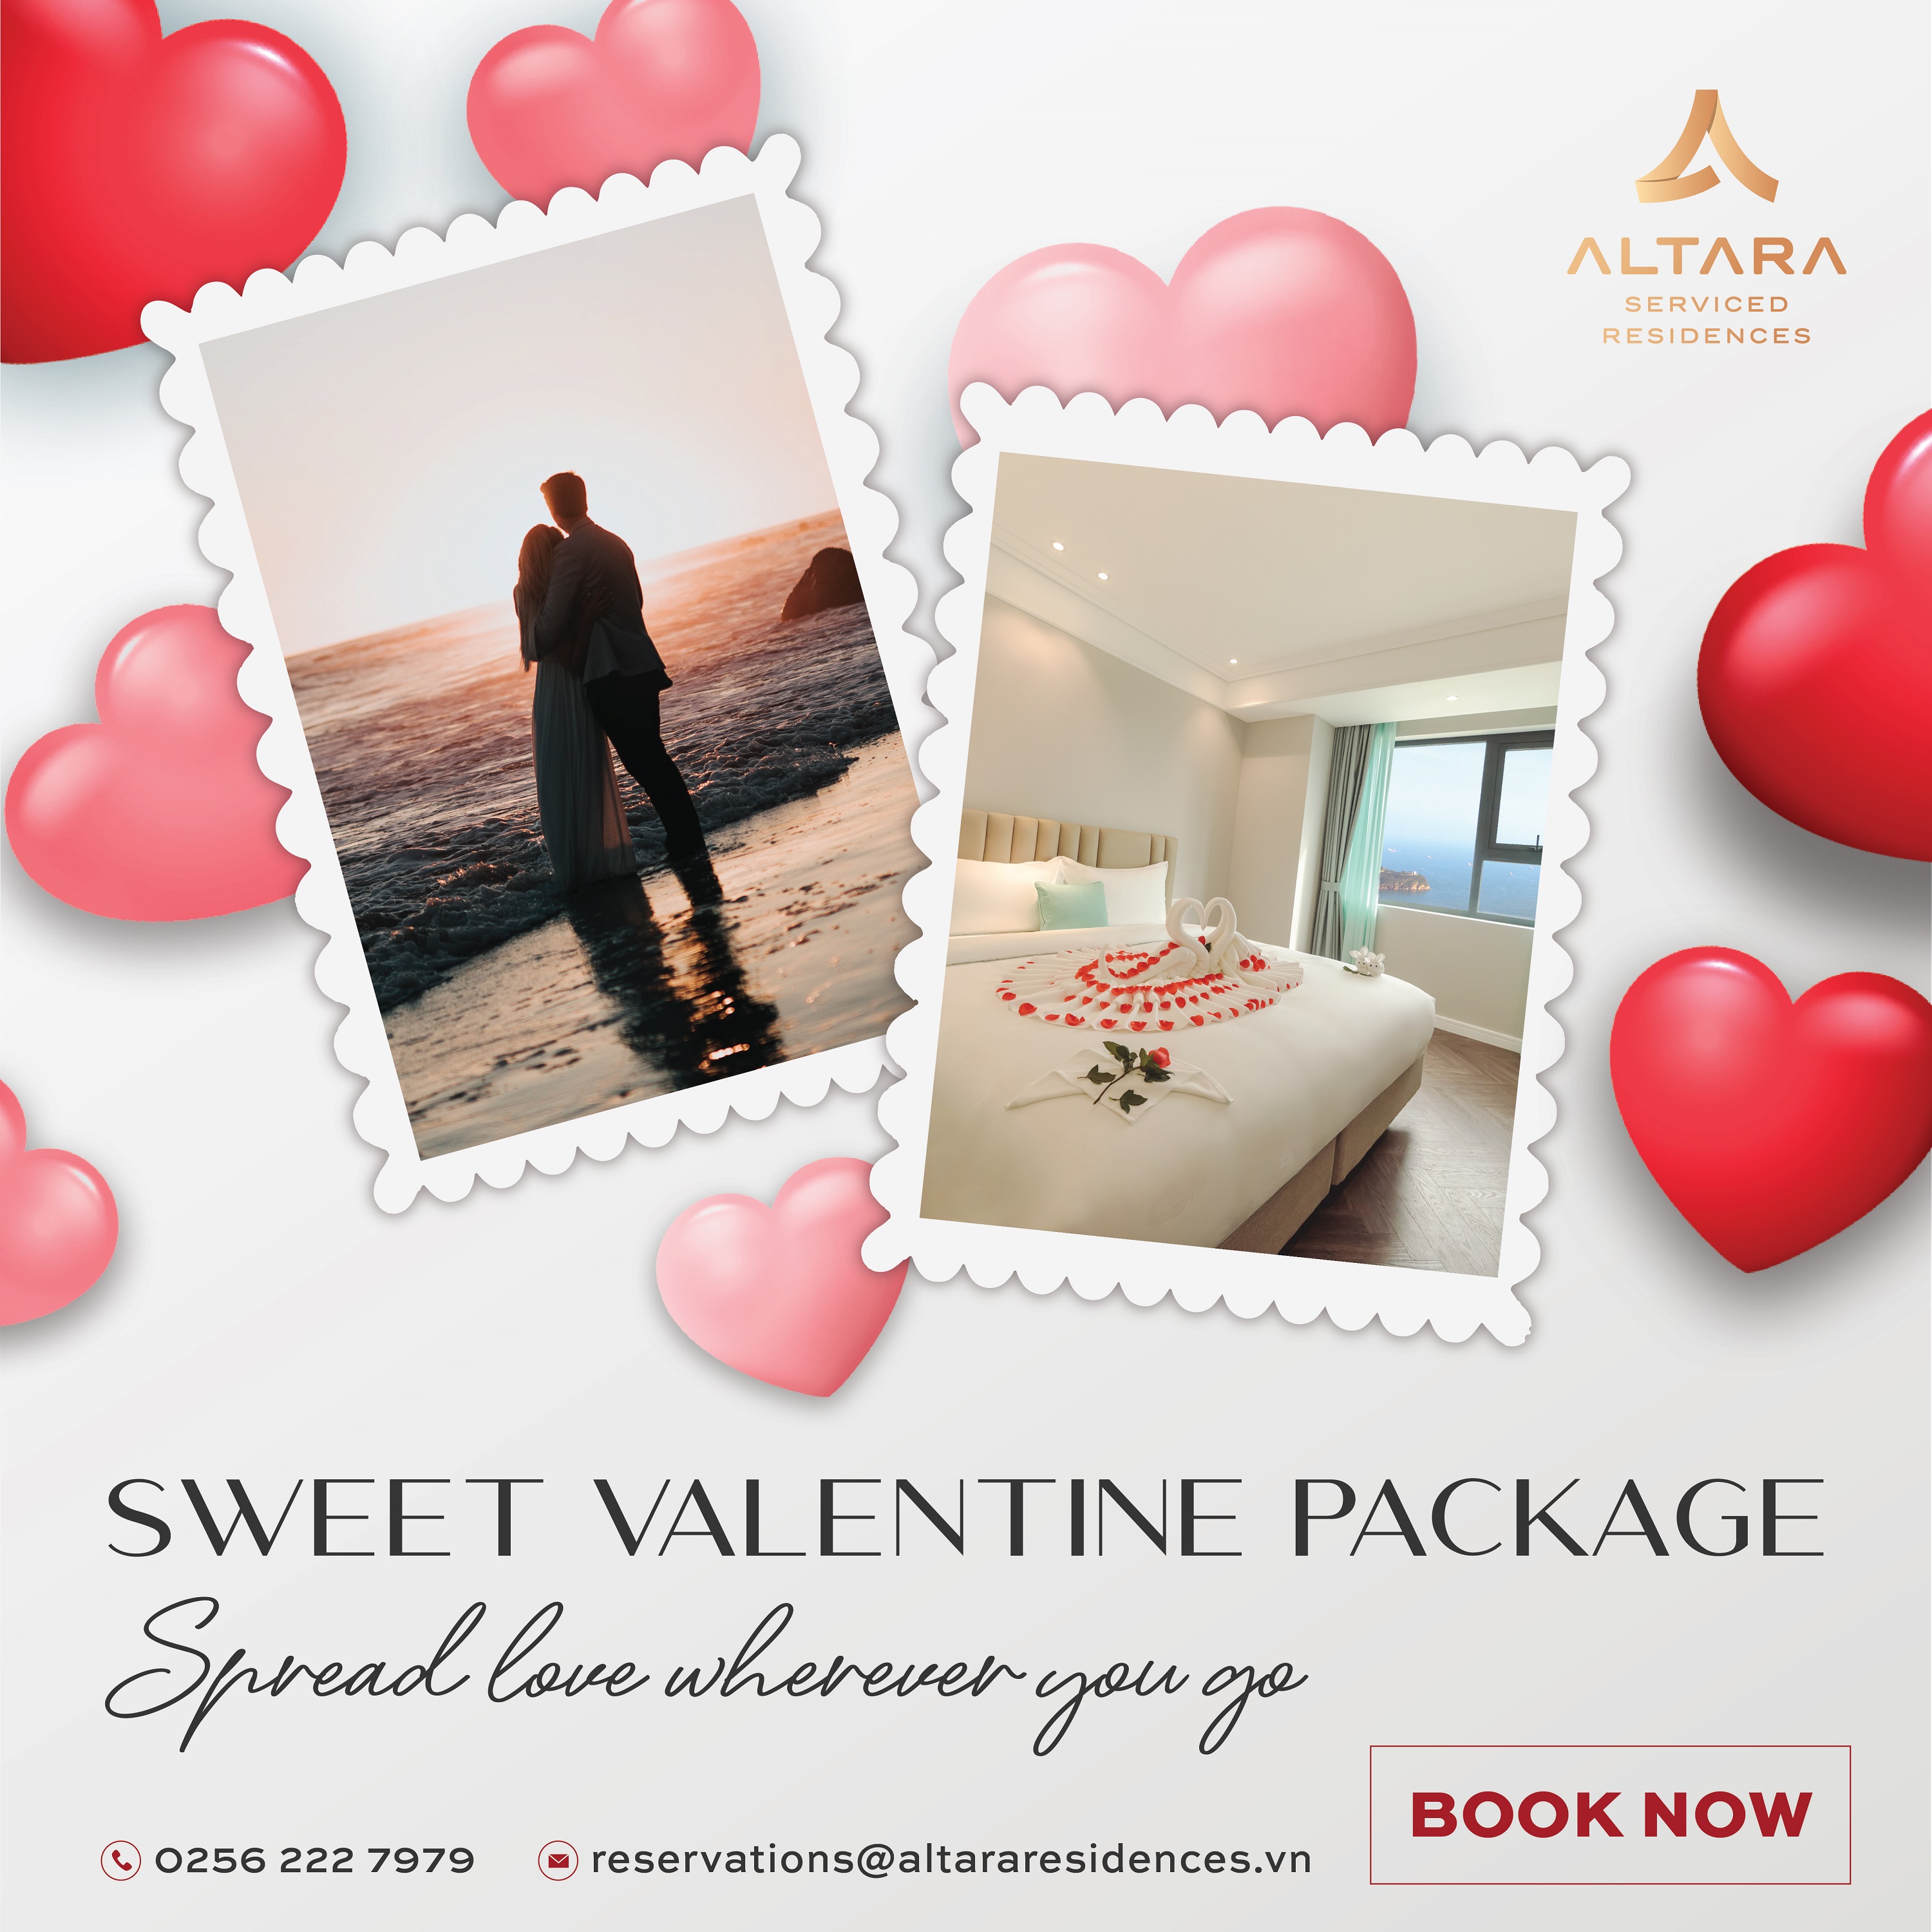 Treat your special someone to a romantic escape at Altara